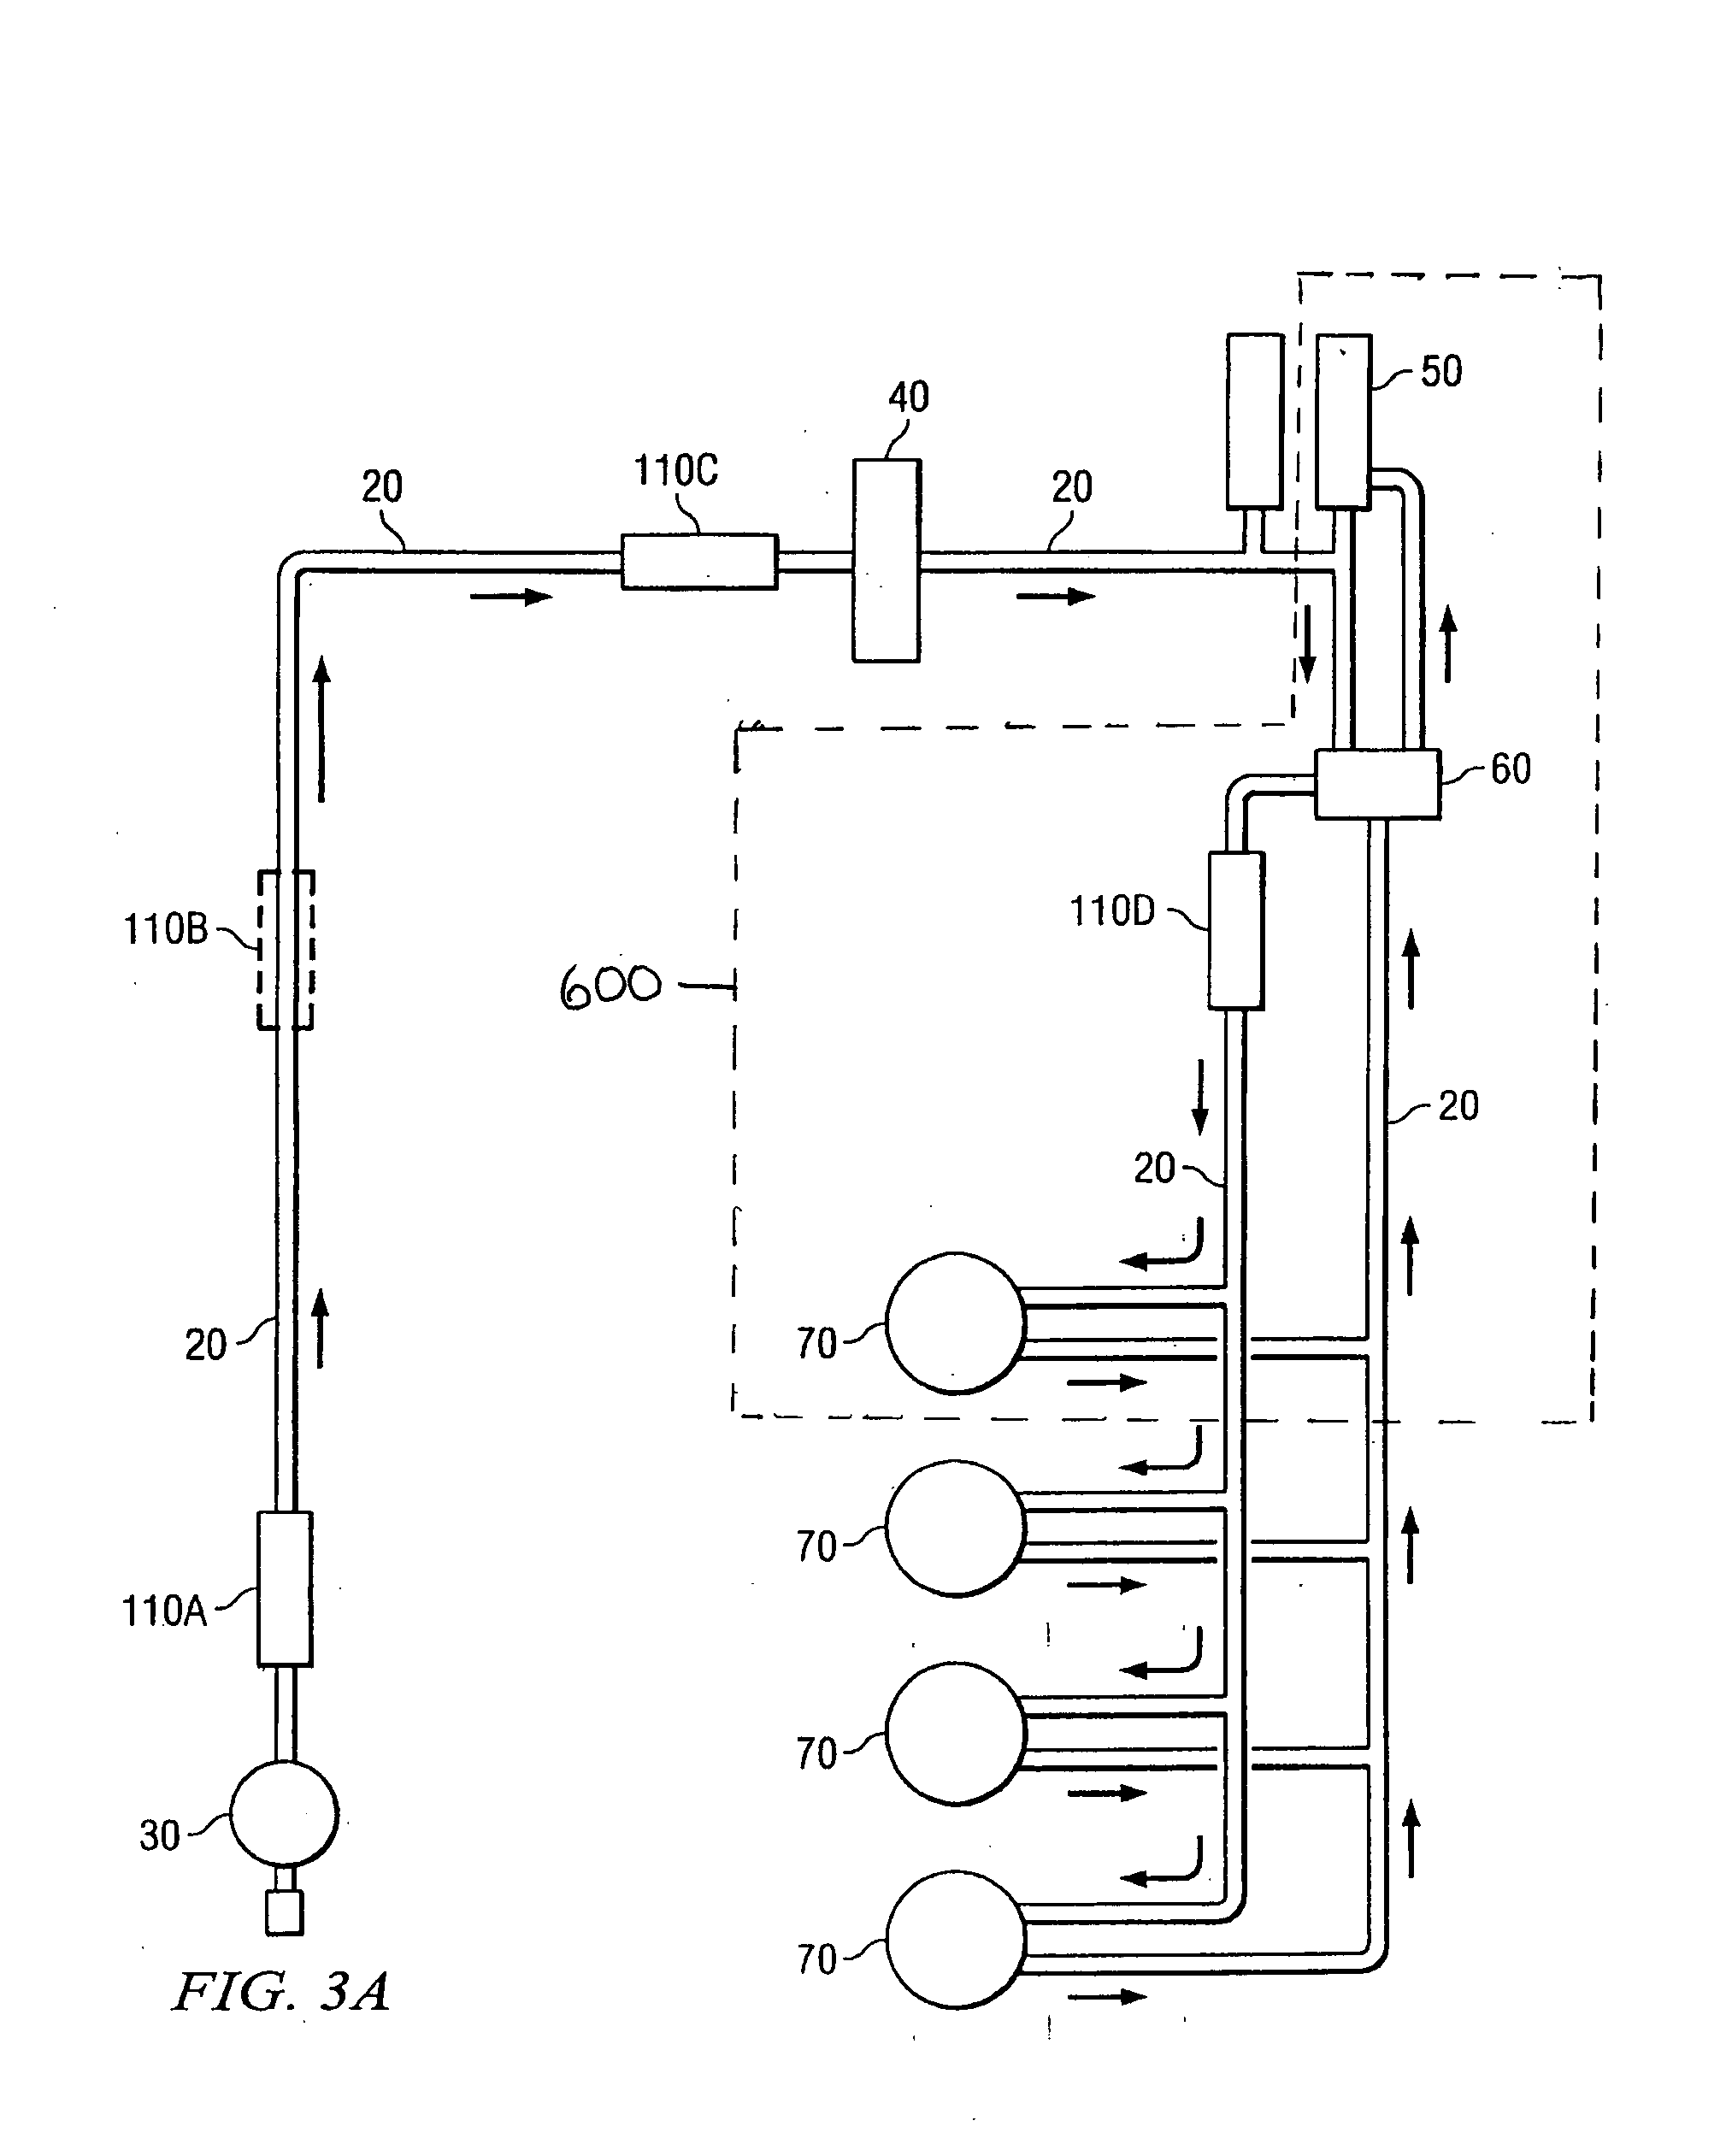 Fluid conditioning system and method